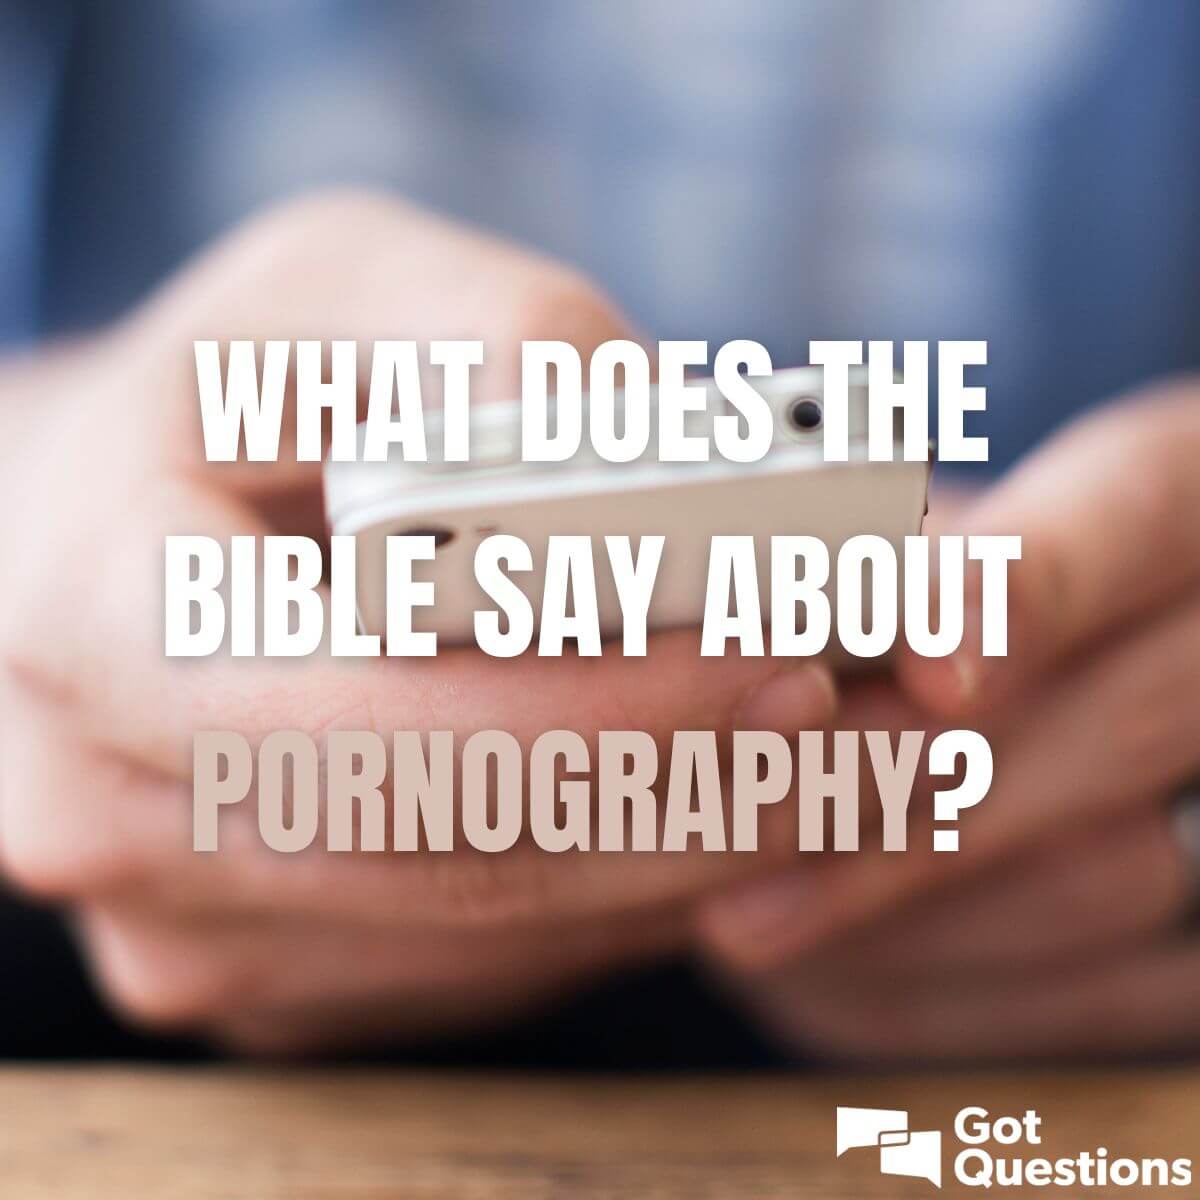 Biblical Porn - What does the Bible say about pornography? | GotQuestions.org